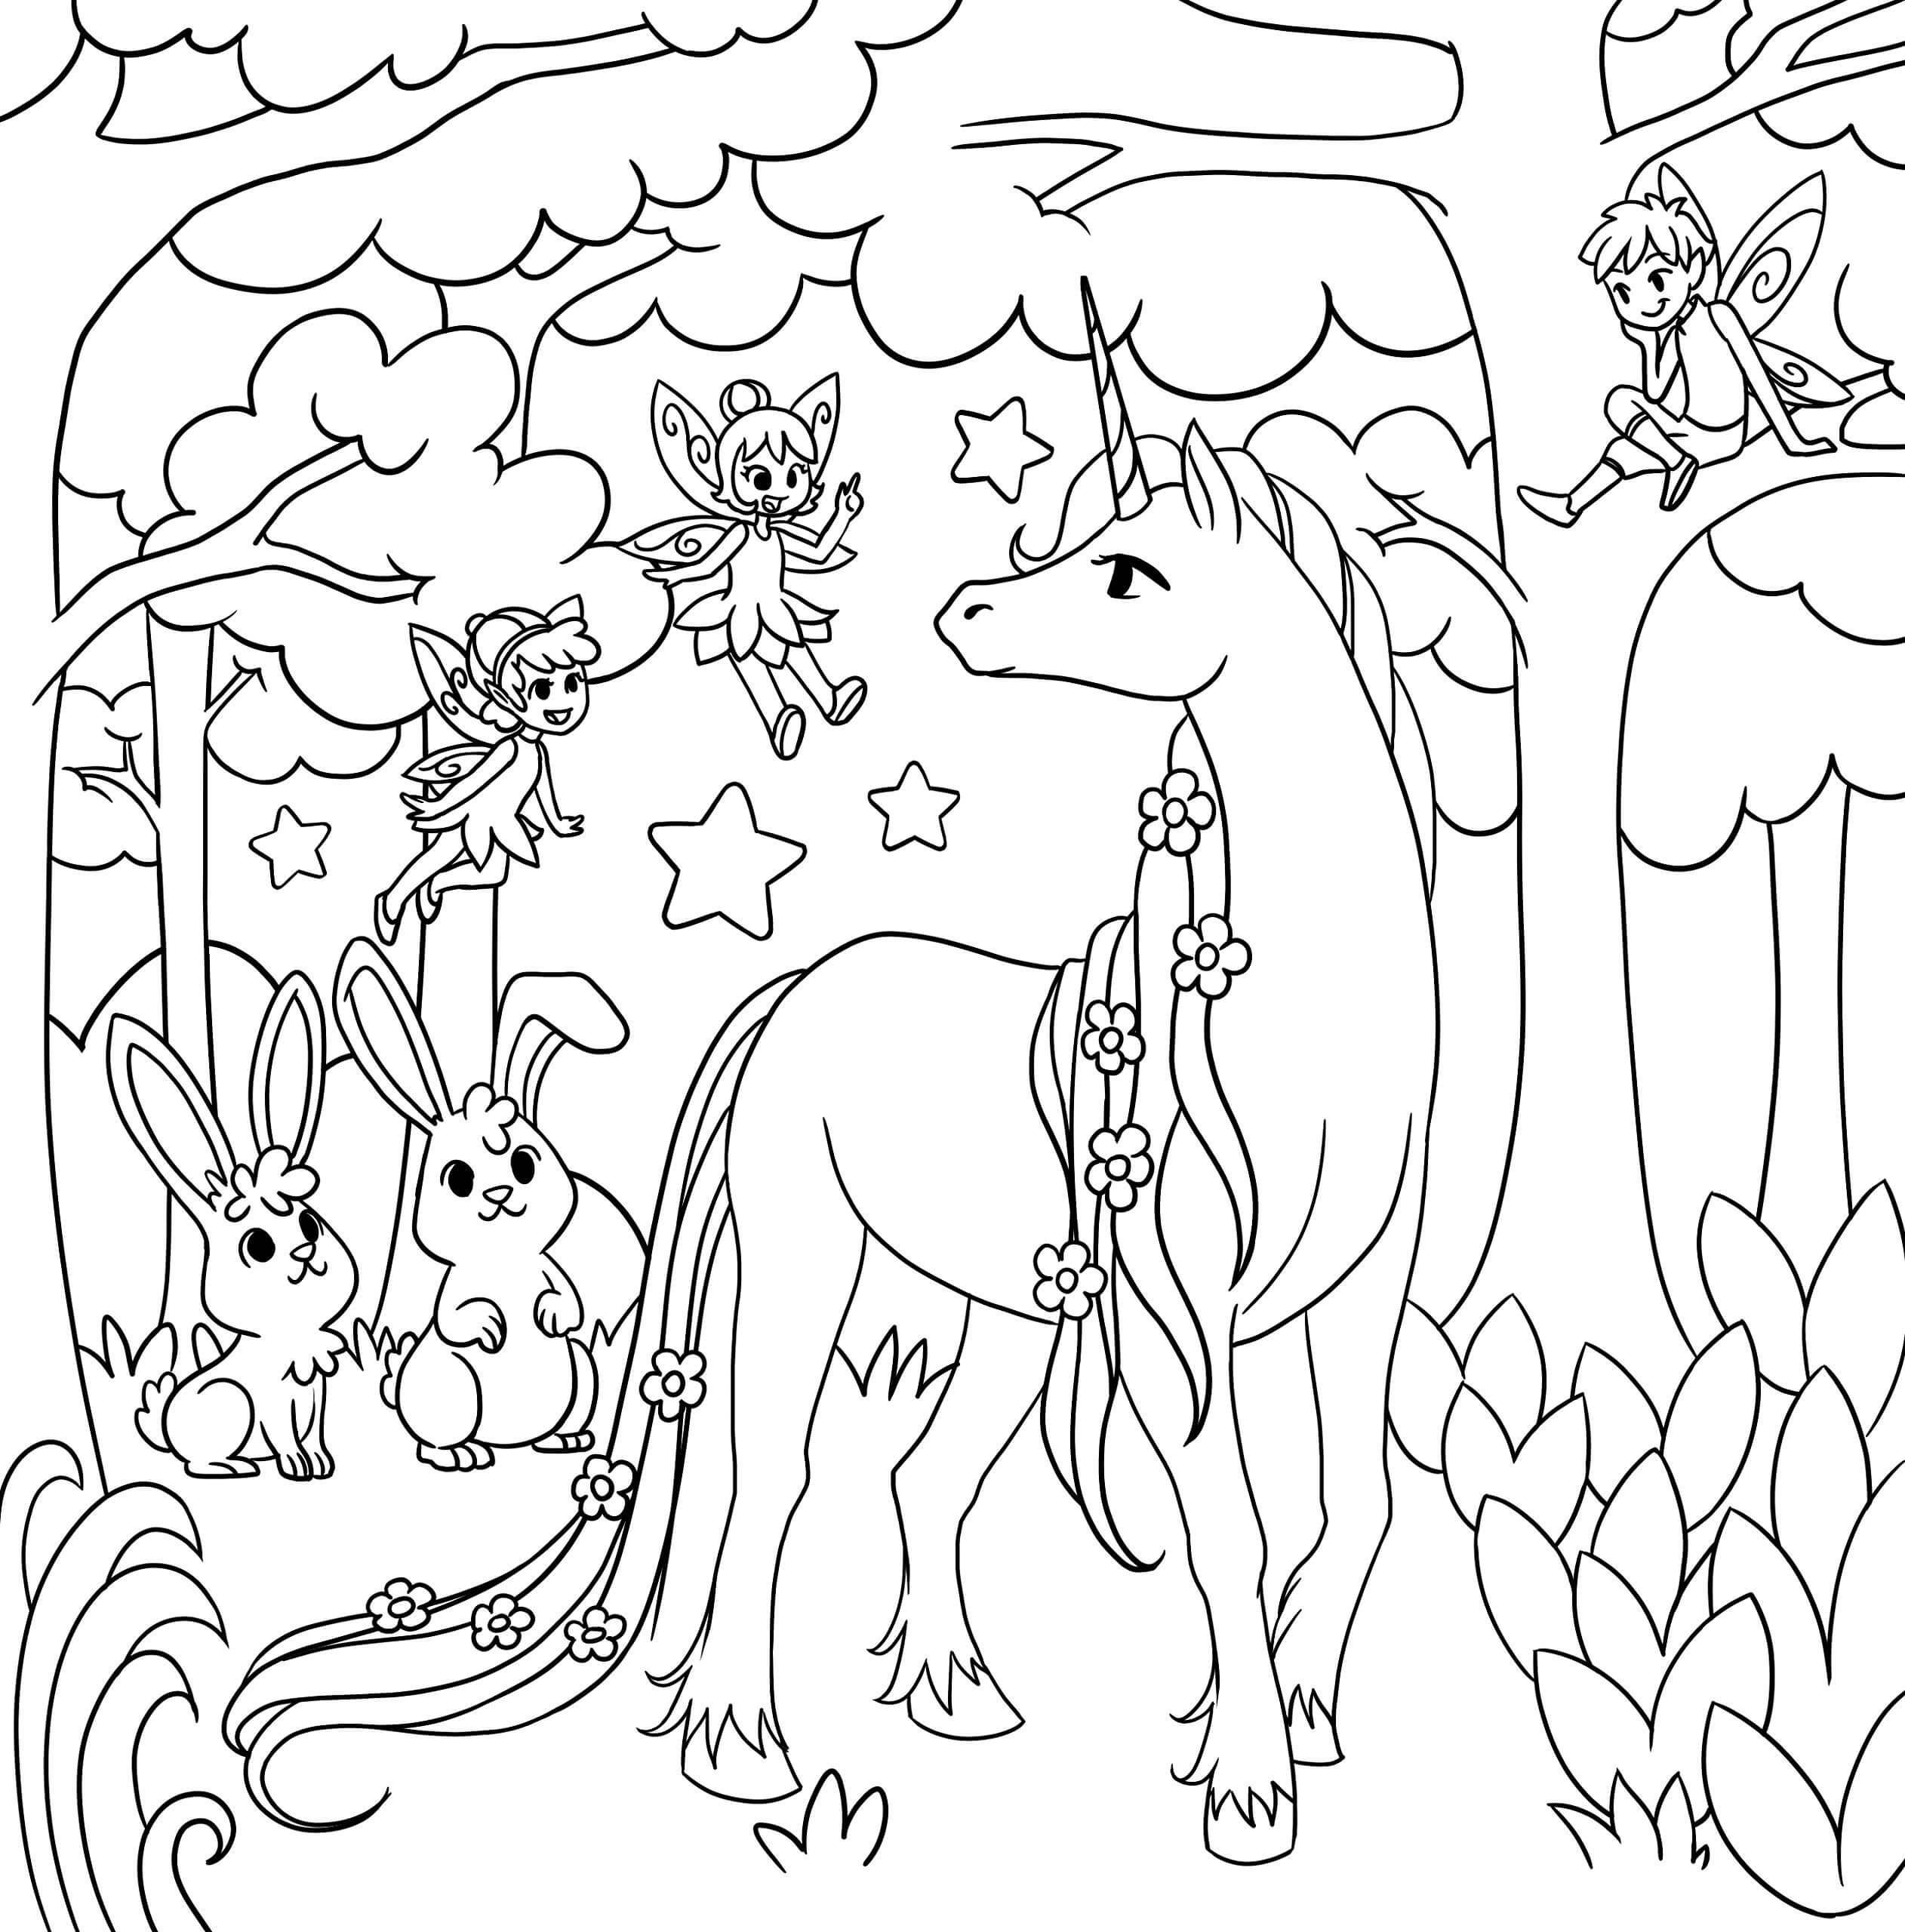 Unicorn Magic Forests coloring page